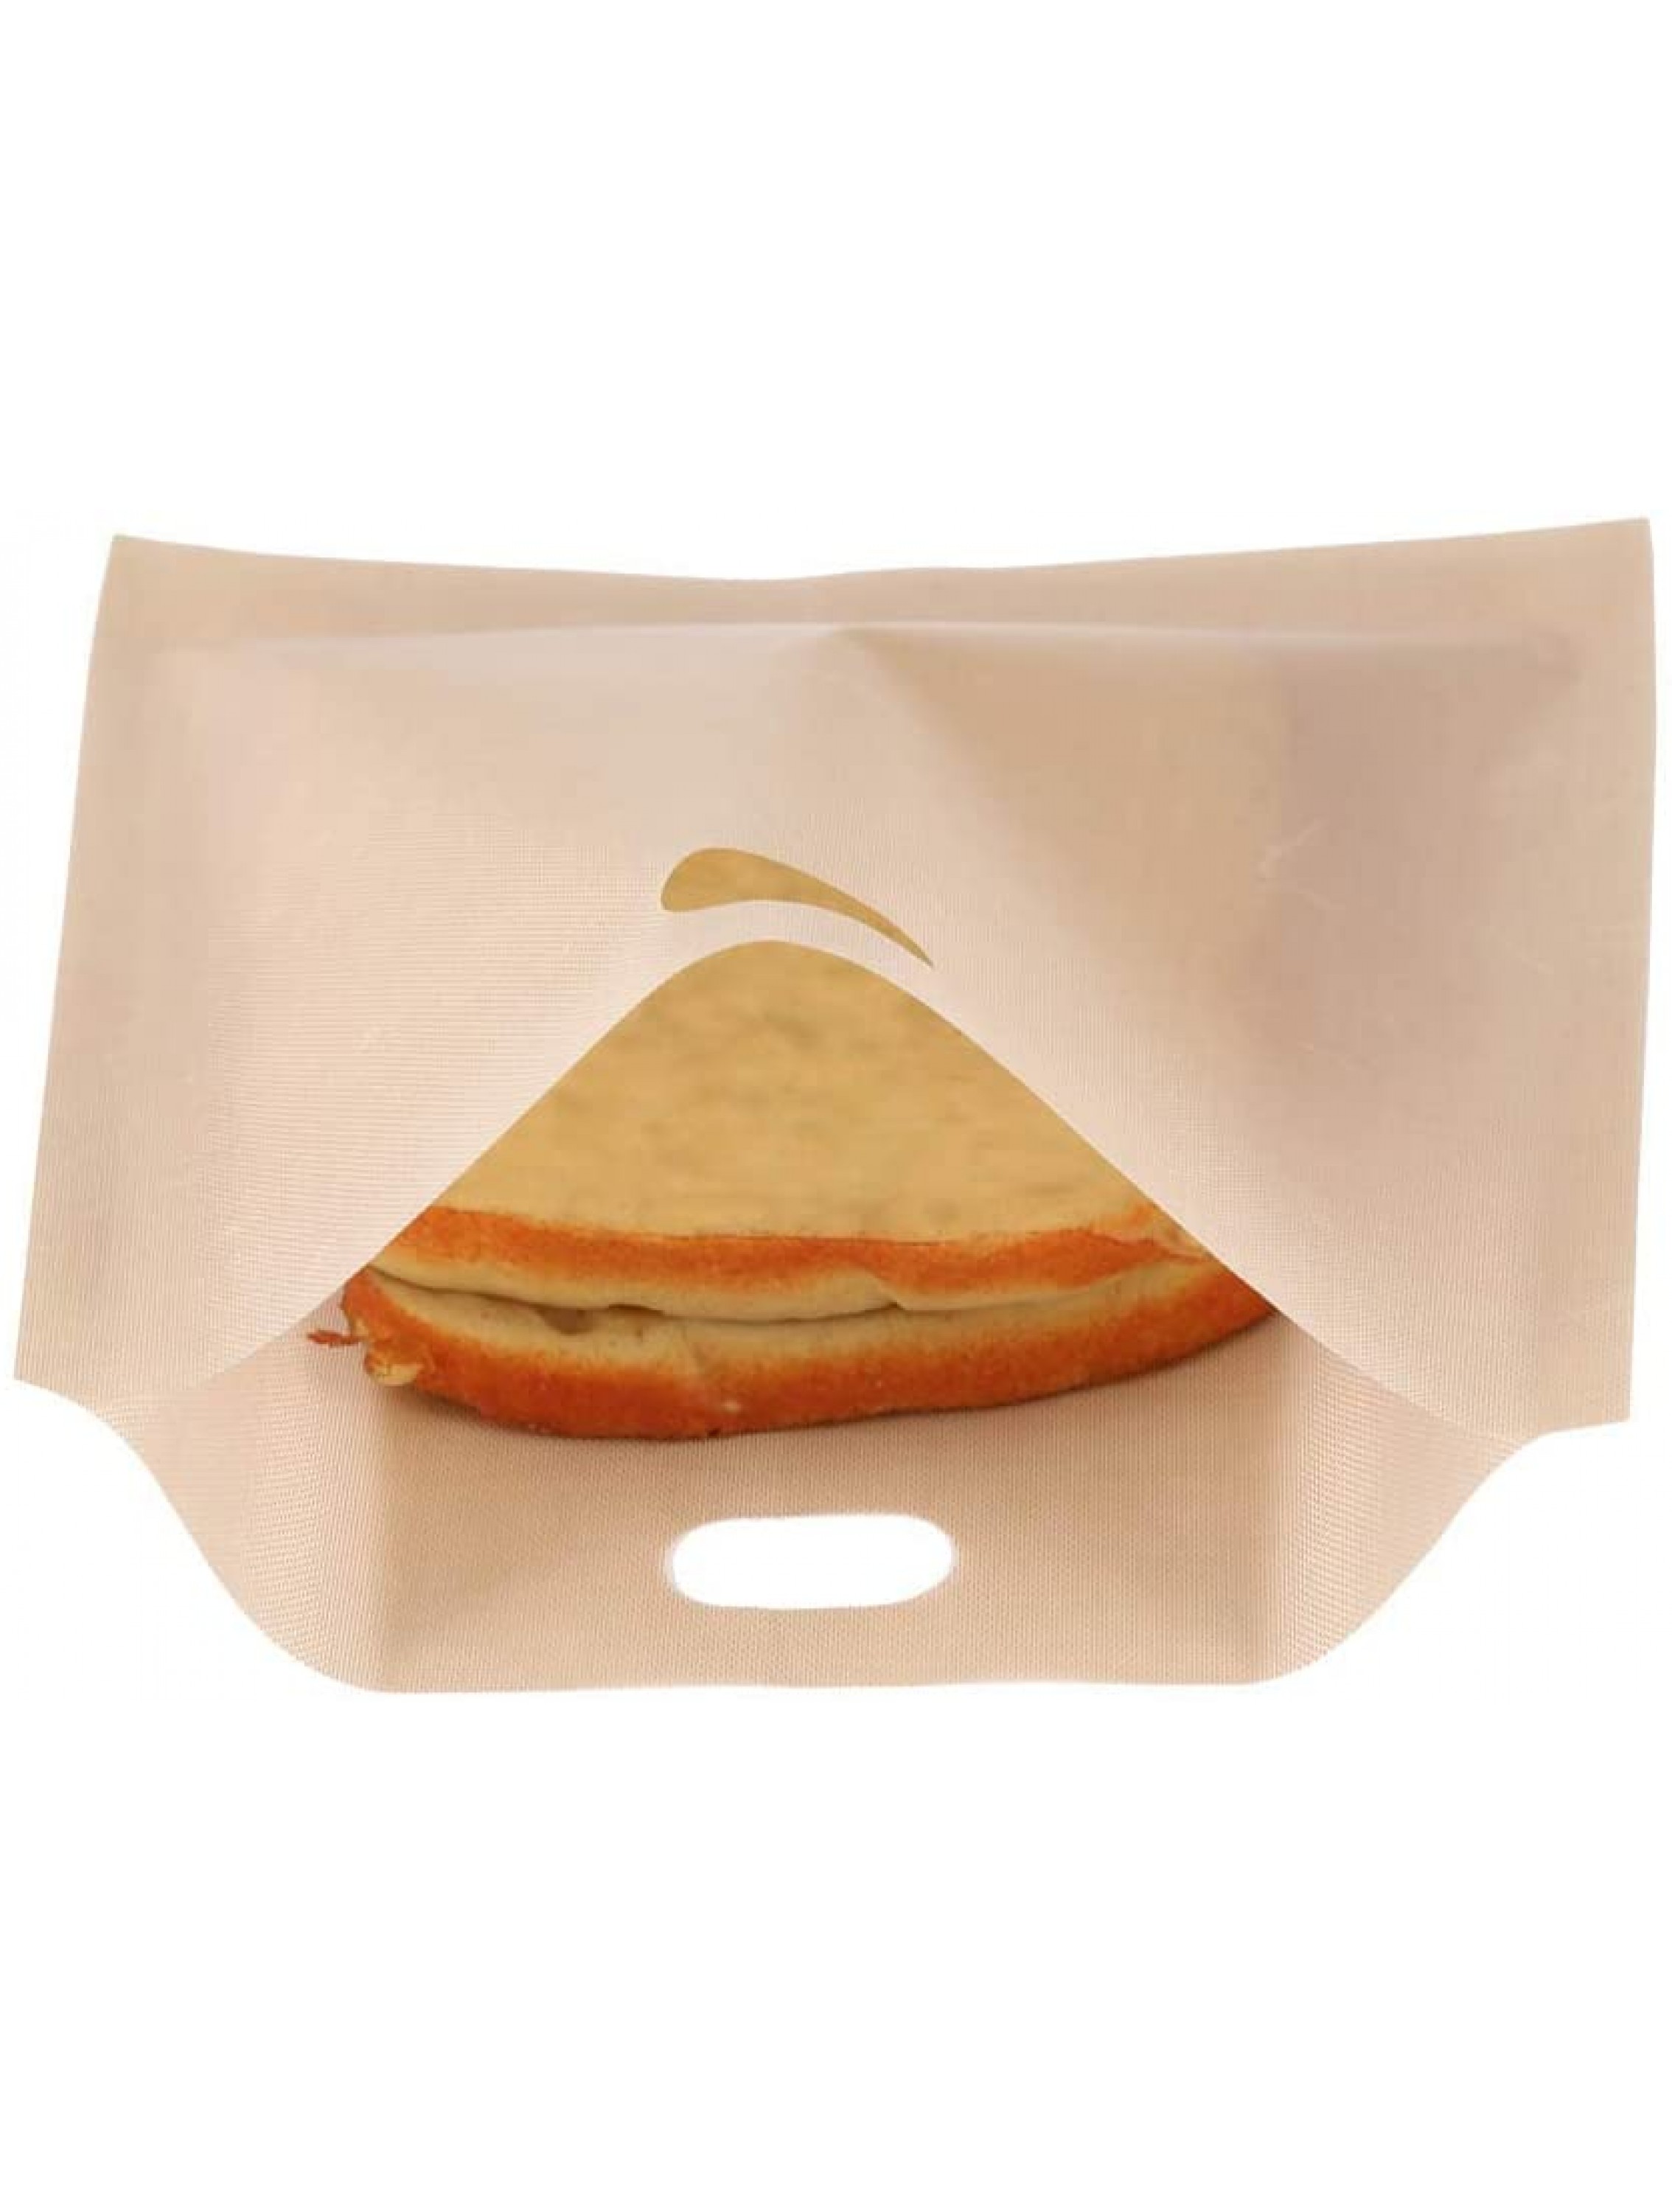 Yosoo Toaster Bag Reusable Non Stick Coated Fiberglass Microwave Heating Pastry Toaster Bread Sandwich Bags02 - BDRIQFO0F